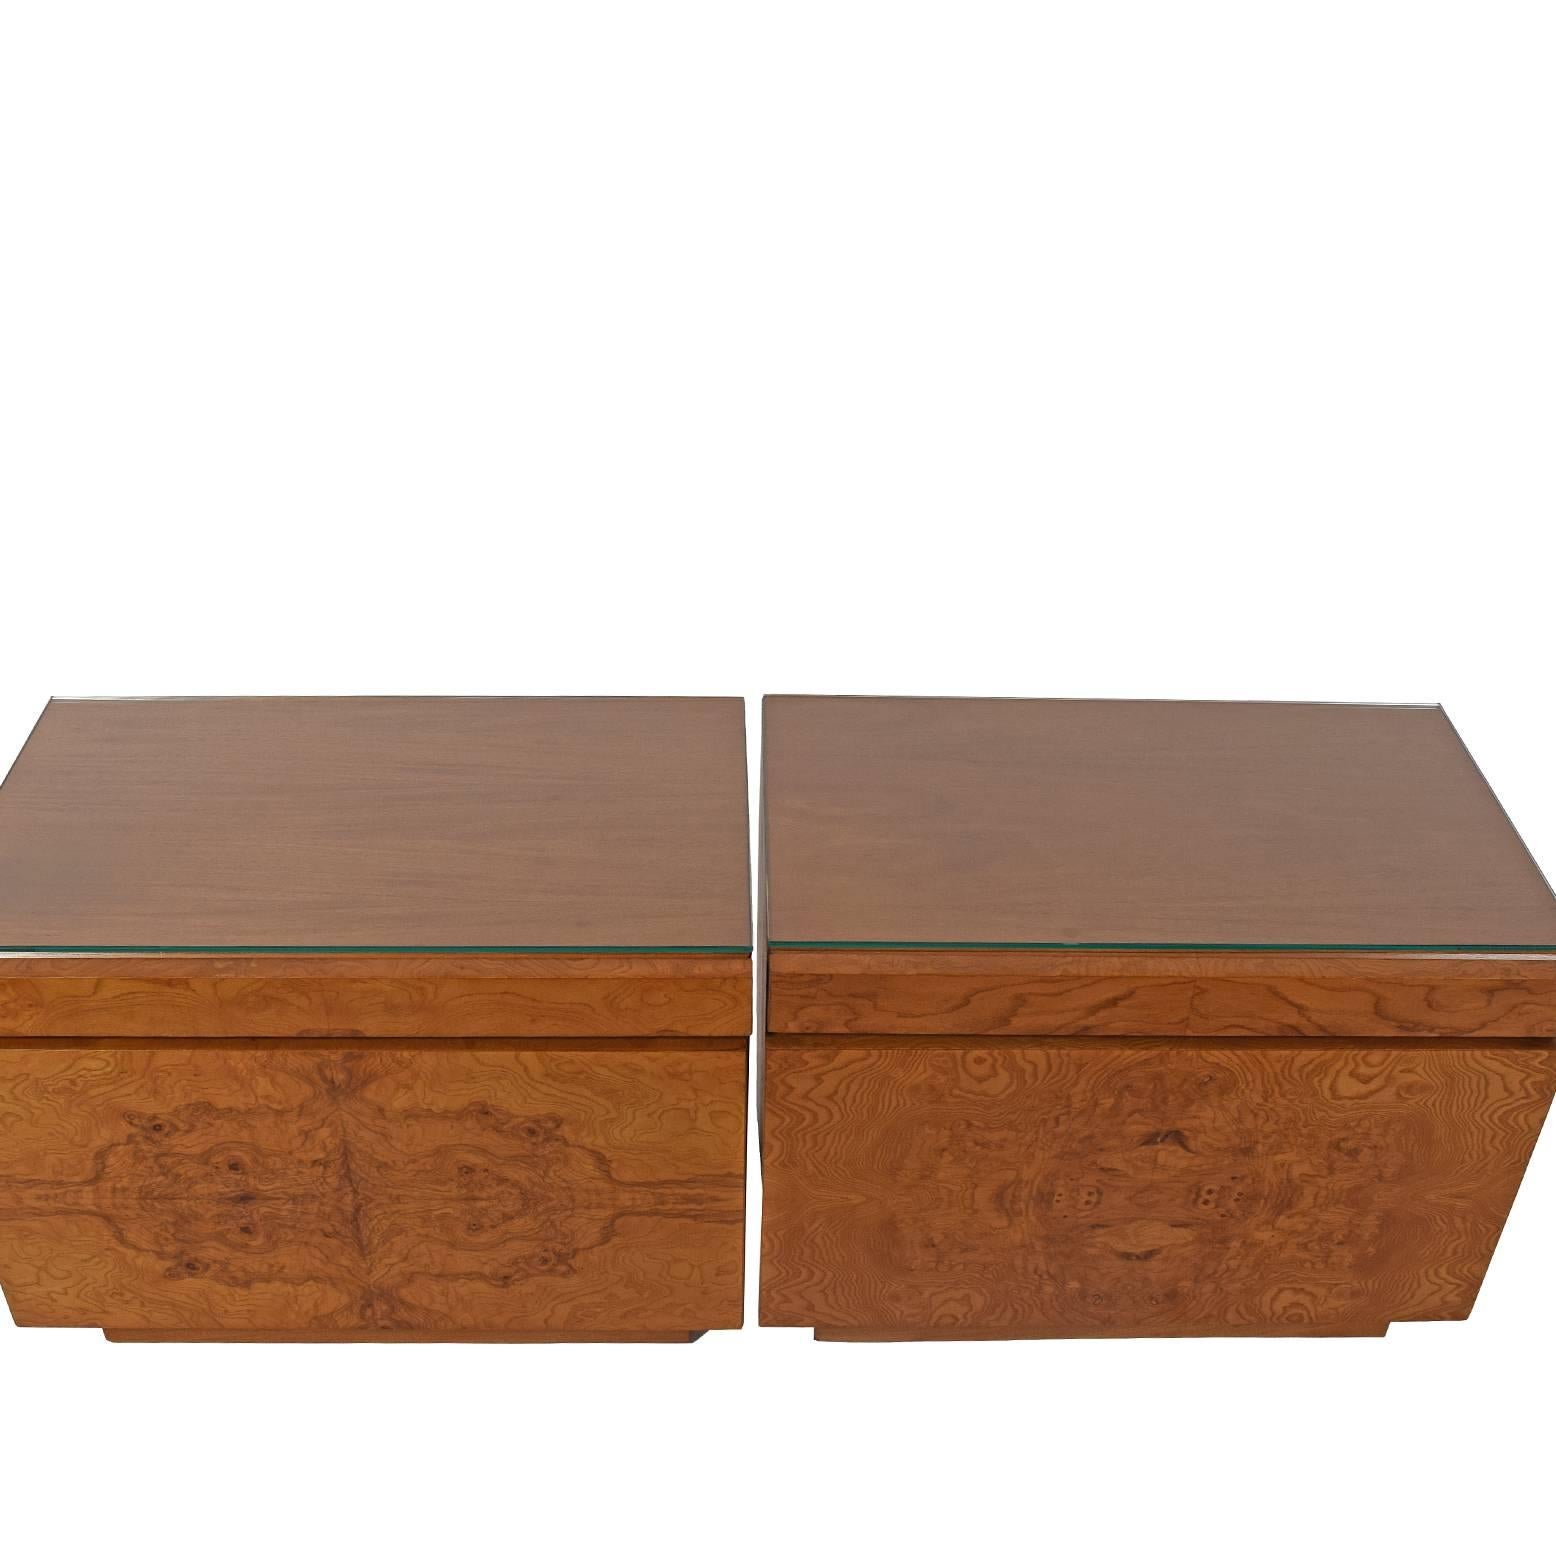 Late 20th Century Pair of Nightstands by Lane Furniture